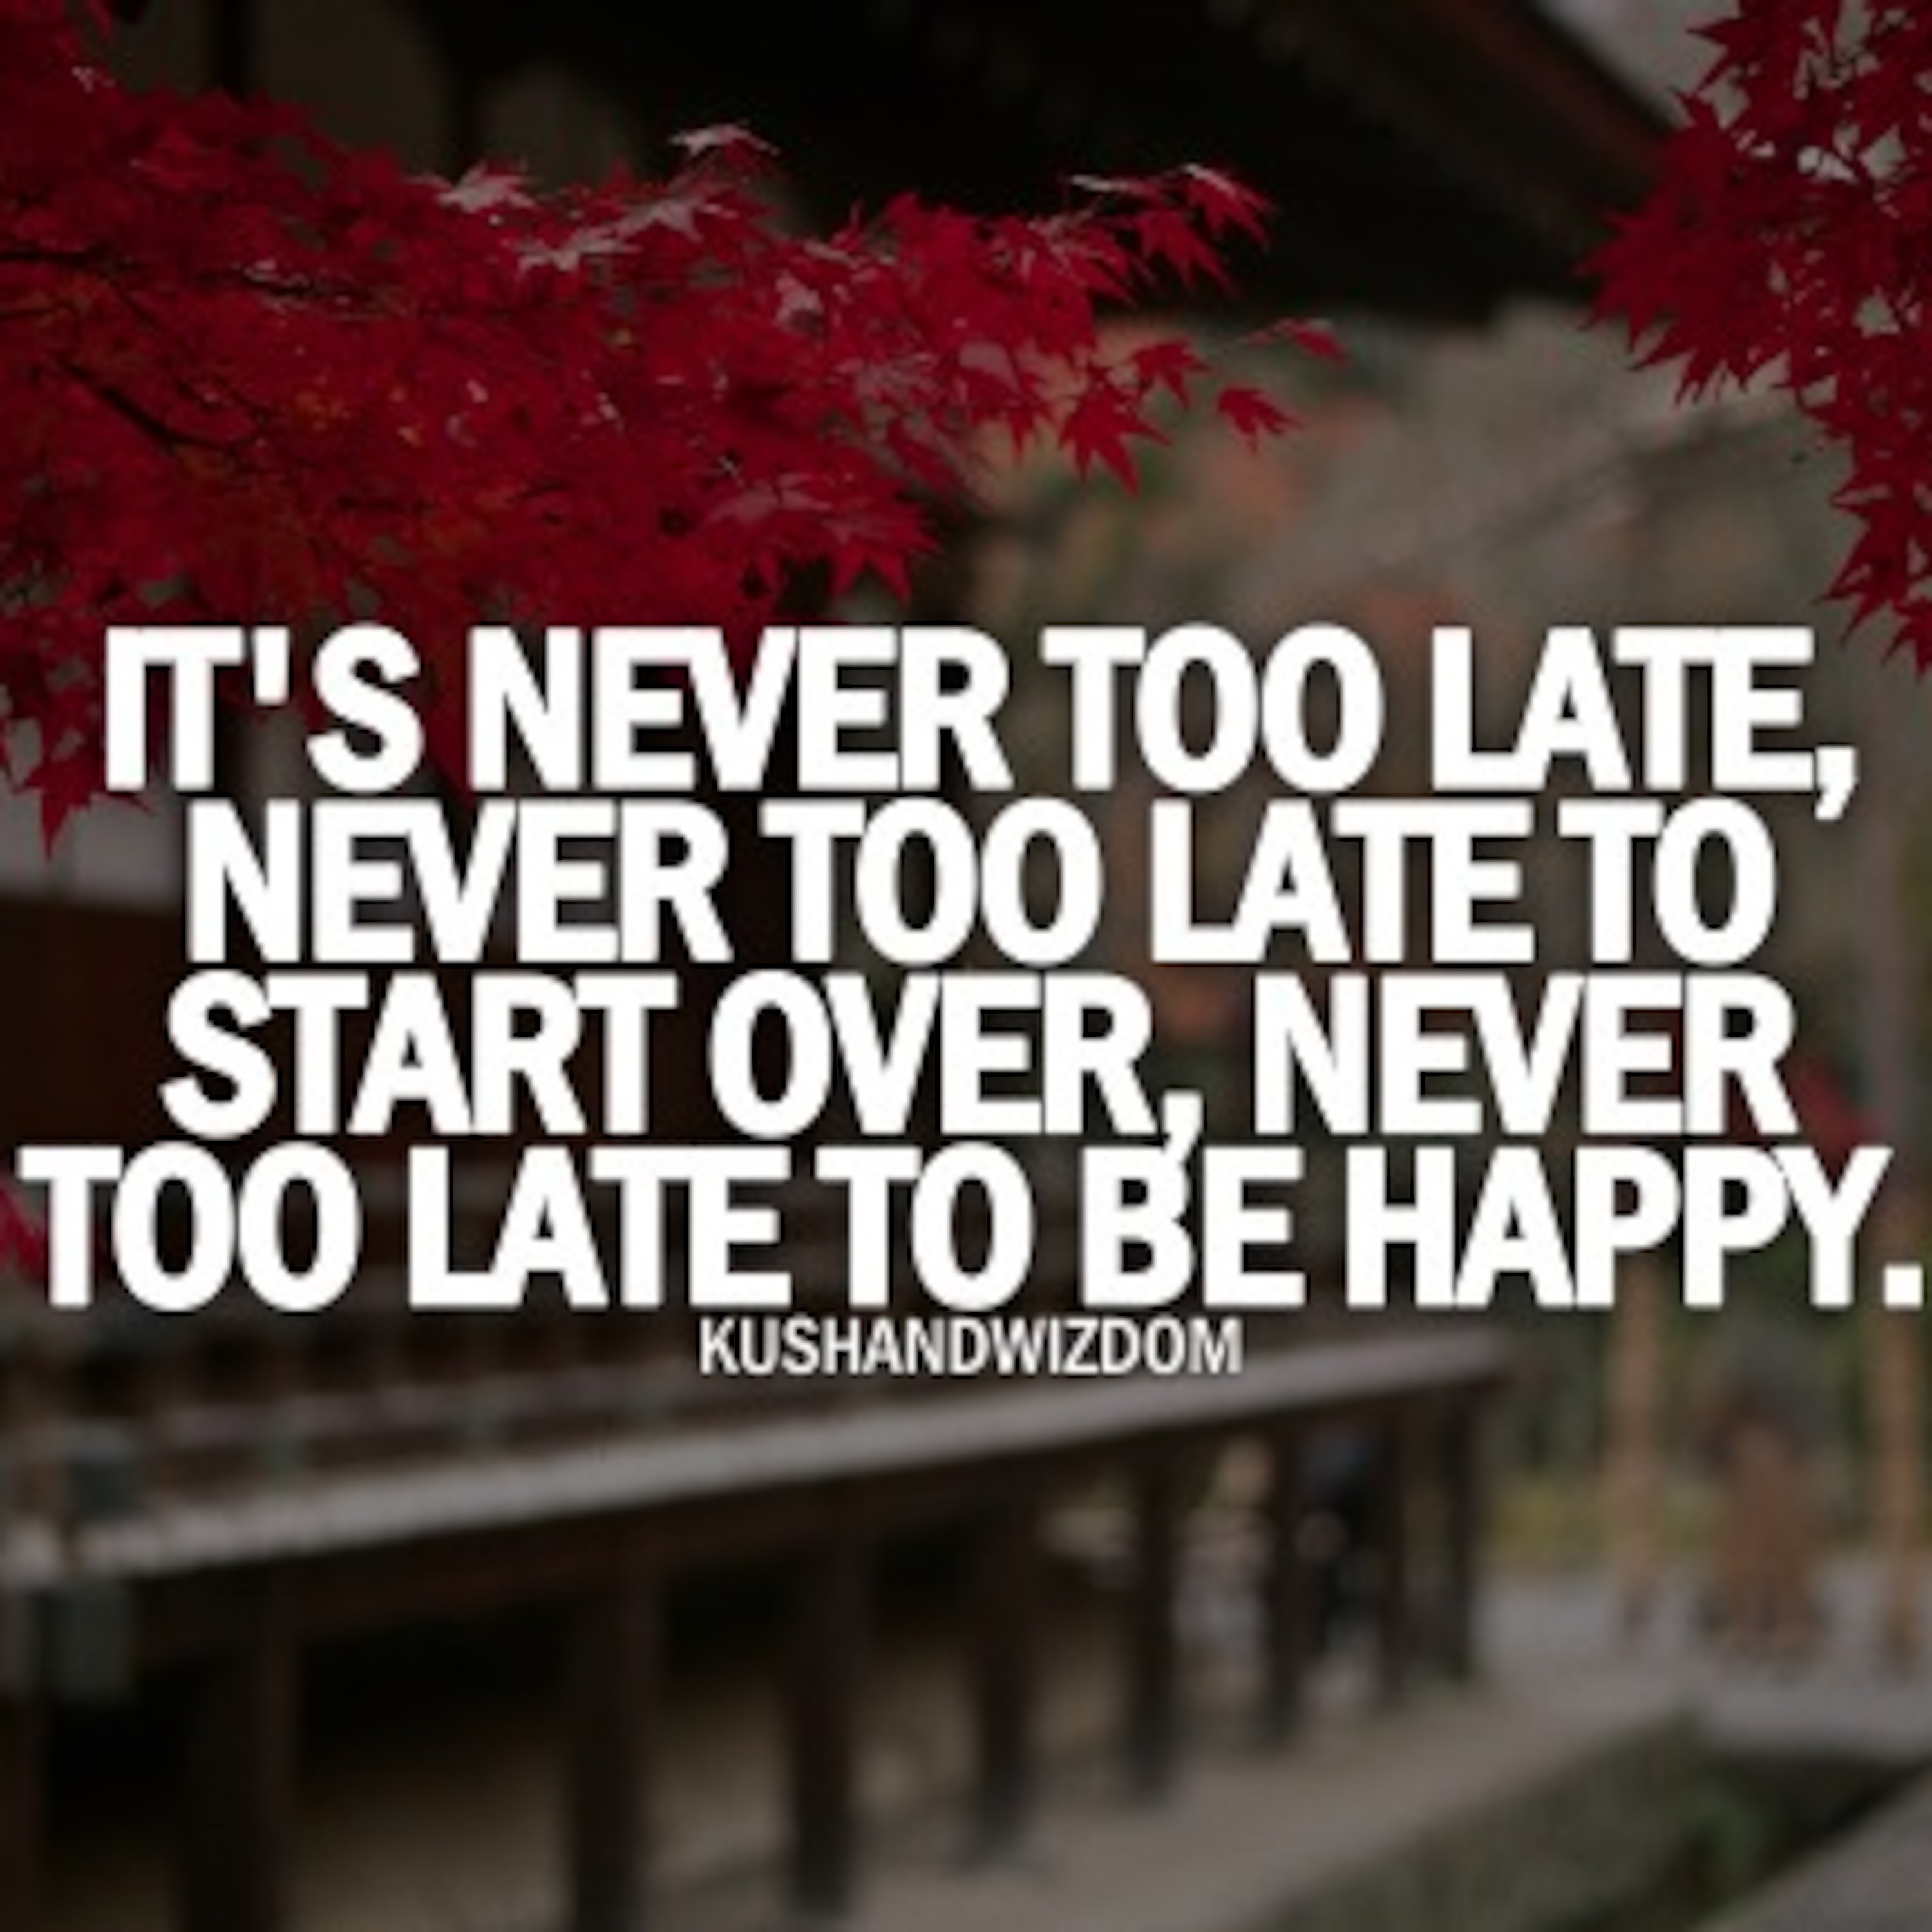 You are never late are you. Quotes about being too late. Never late to be Happy. It's never too late to start over. Never to late.